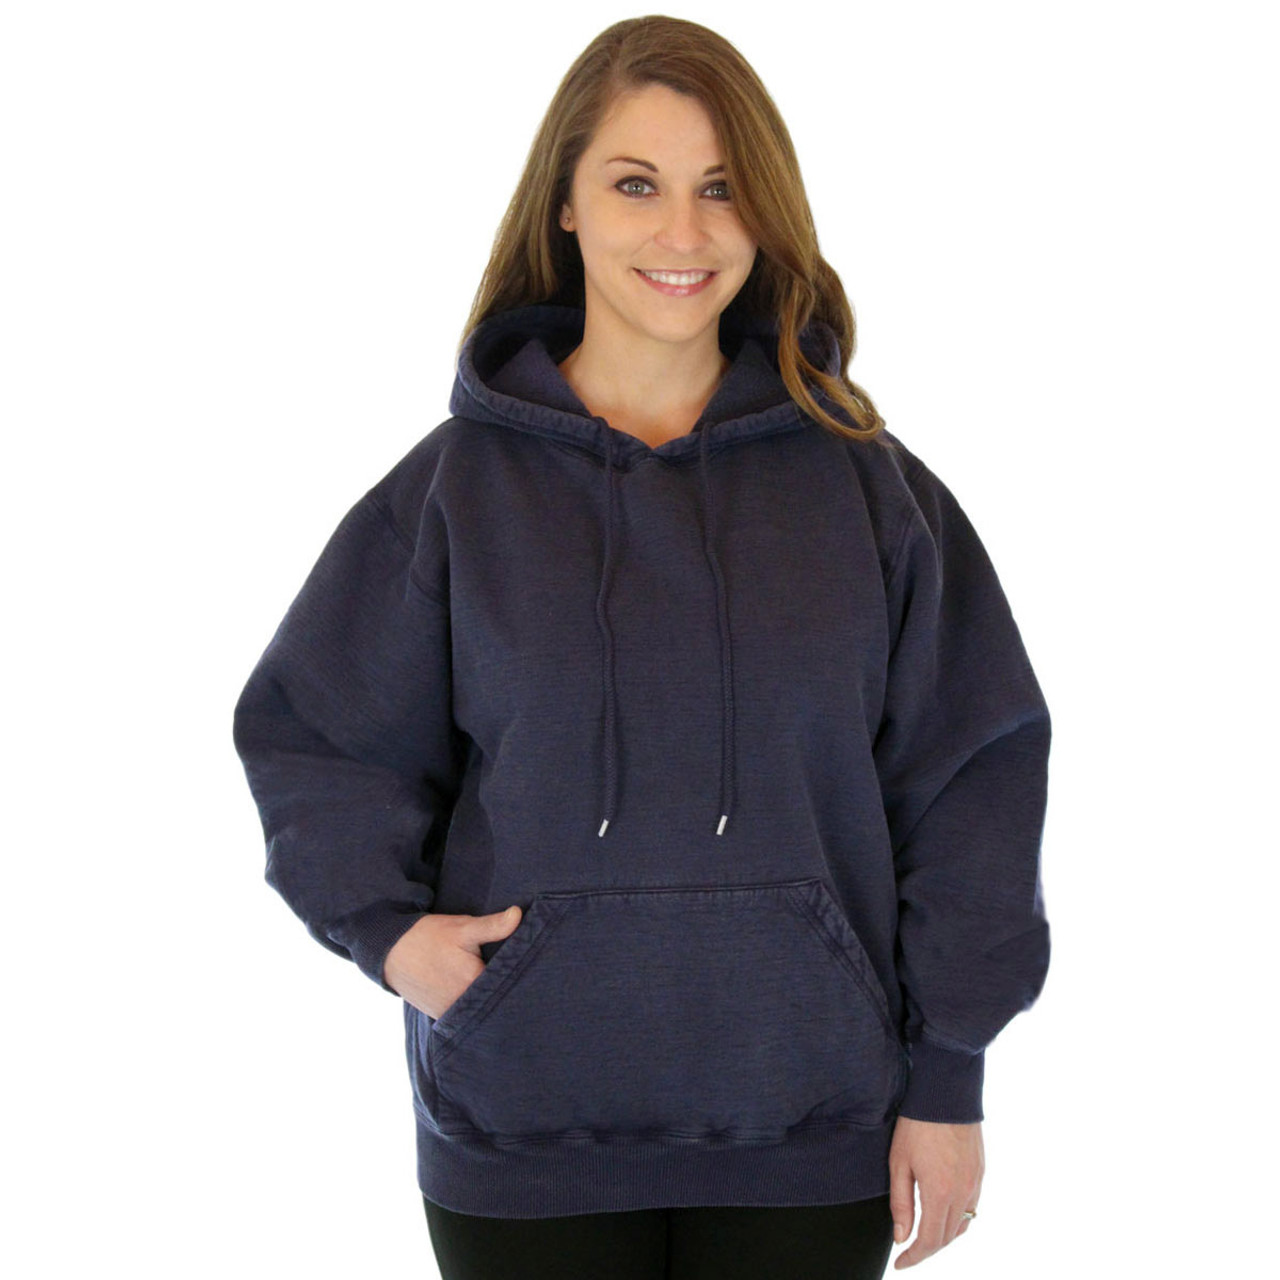 100% Heavy Cotton Womens Hoodie Pullover Sweatshirt Made in Canada